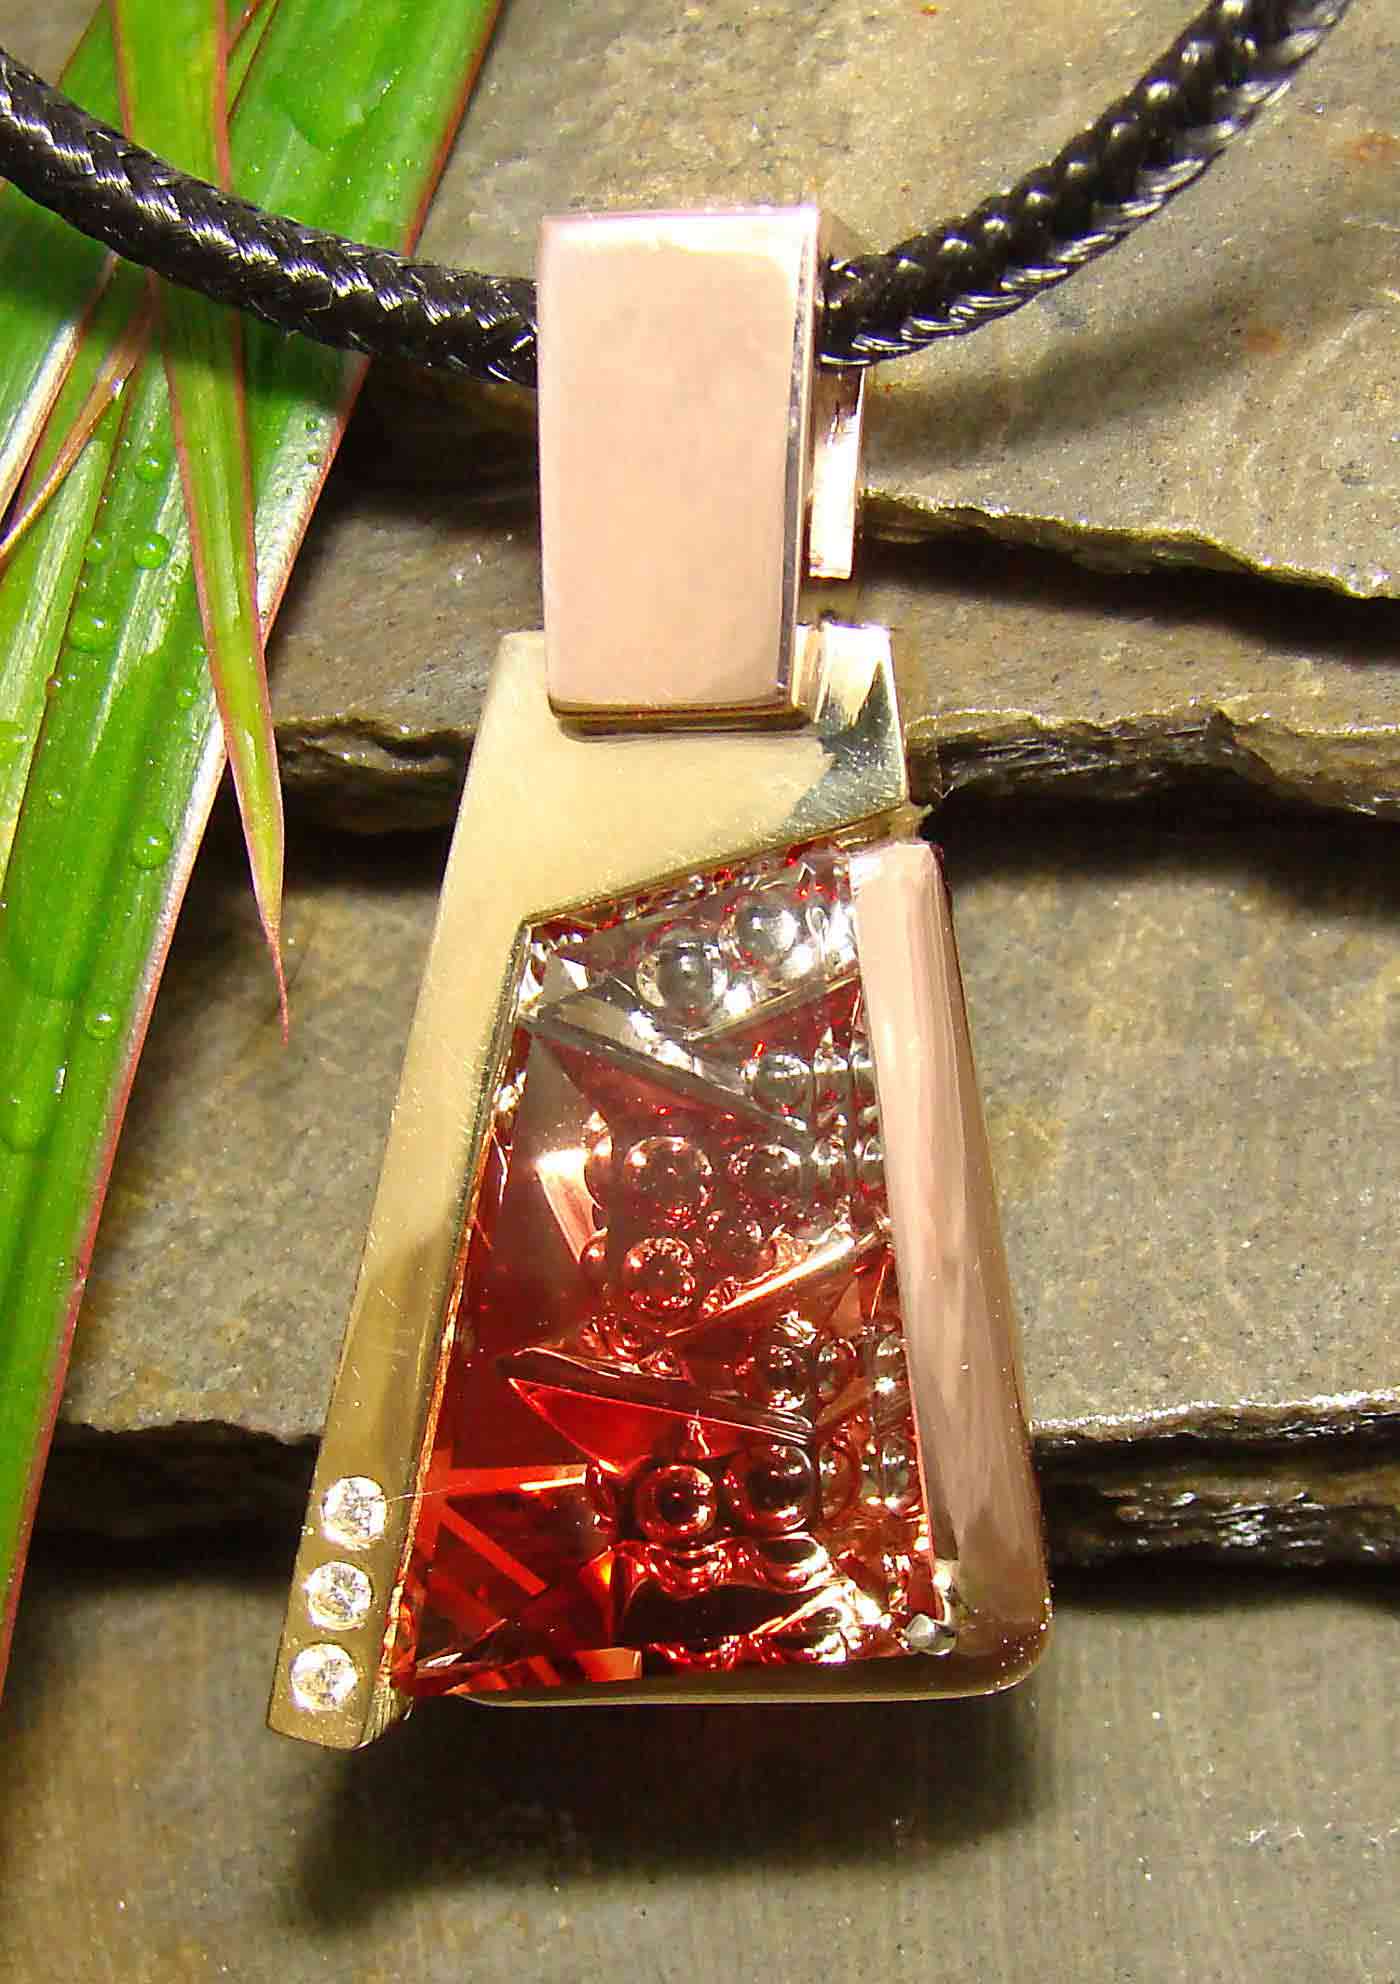 Fantasy Cut Sunstone from Oregon in a custom gold and diamond pendant designed by Peter Barr